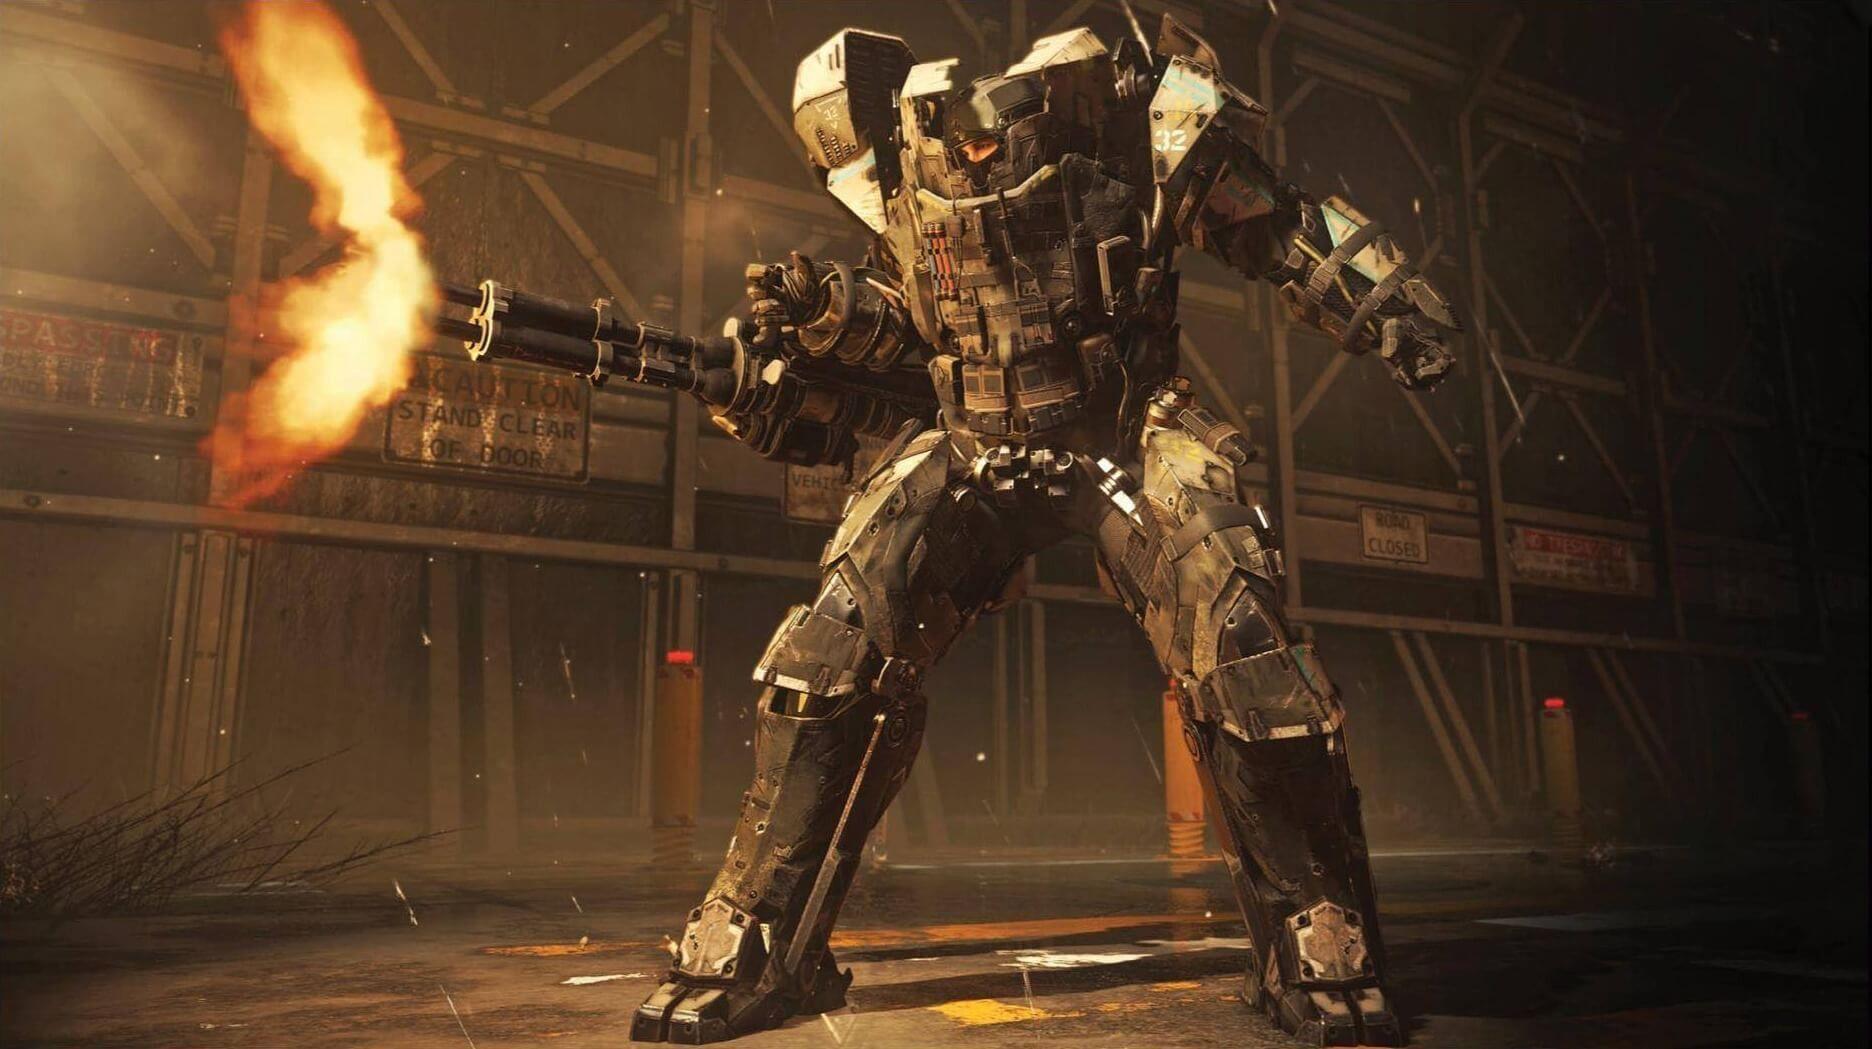 Image Result For Advanced Warfare Mech Suit. Sci Fi Technology